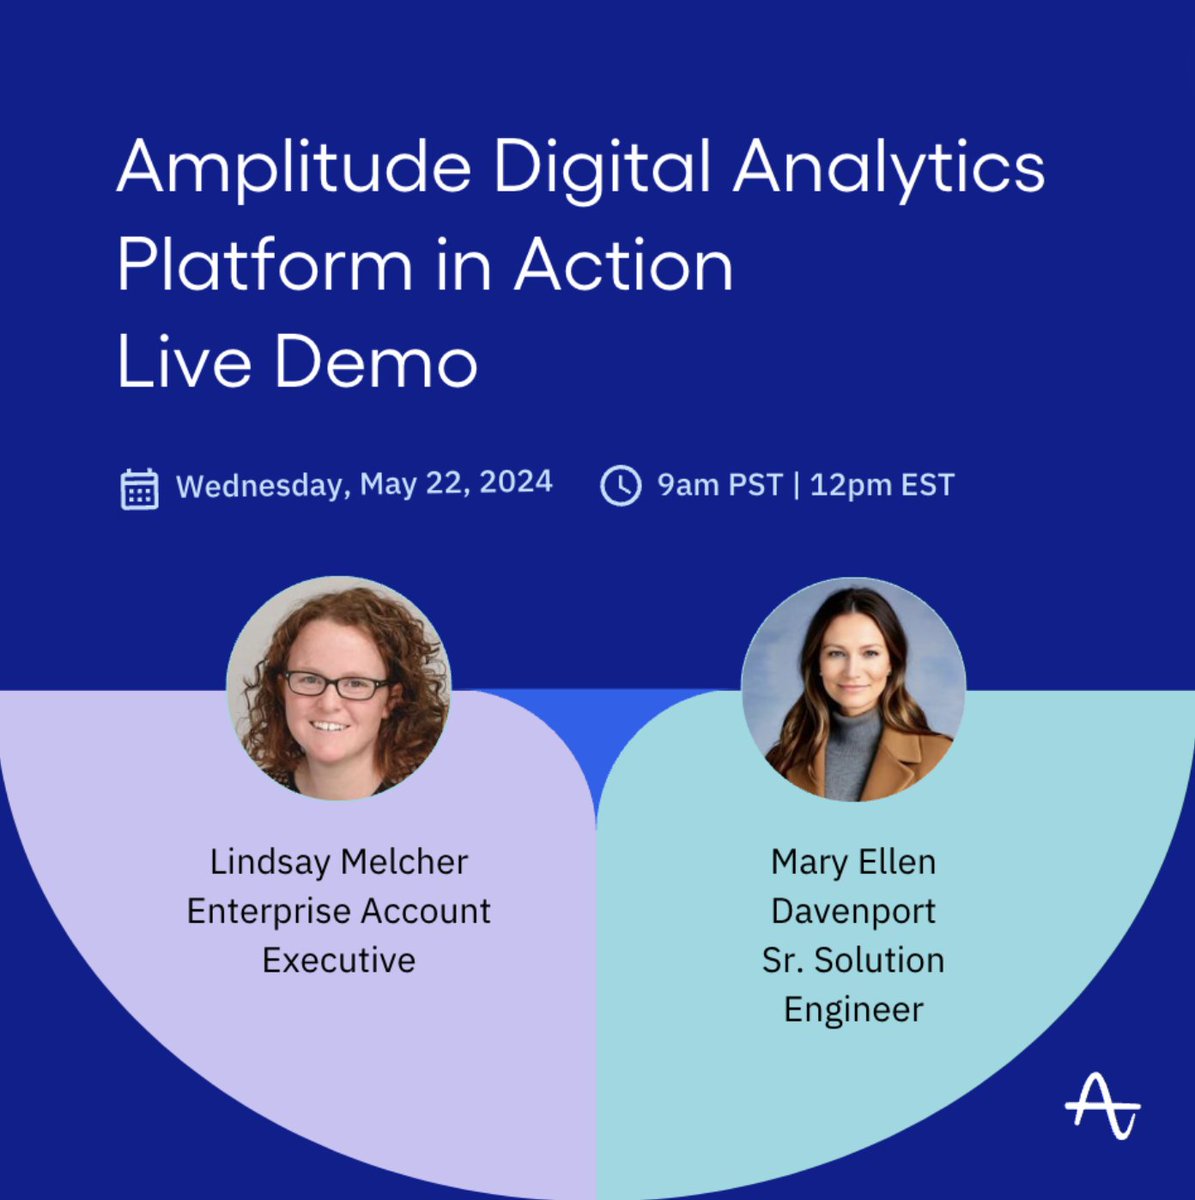 Dive into data 🤿 Join Lindsay Melcher and Mary Ellen Davenport on May 22 for a live demo of the Amplitude Platform: bit.ly/3wMFY5r